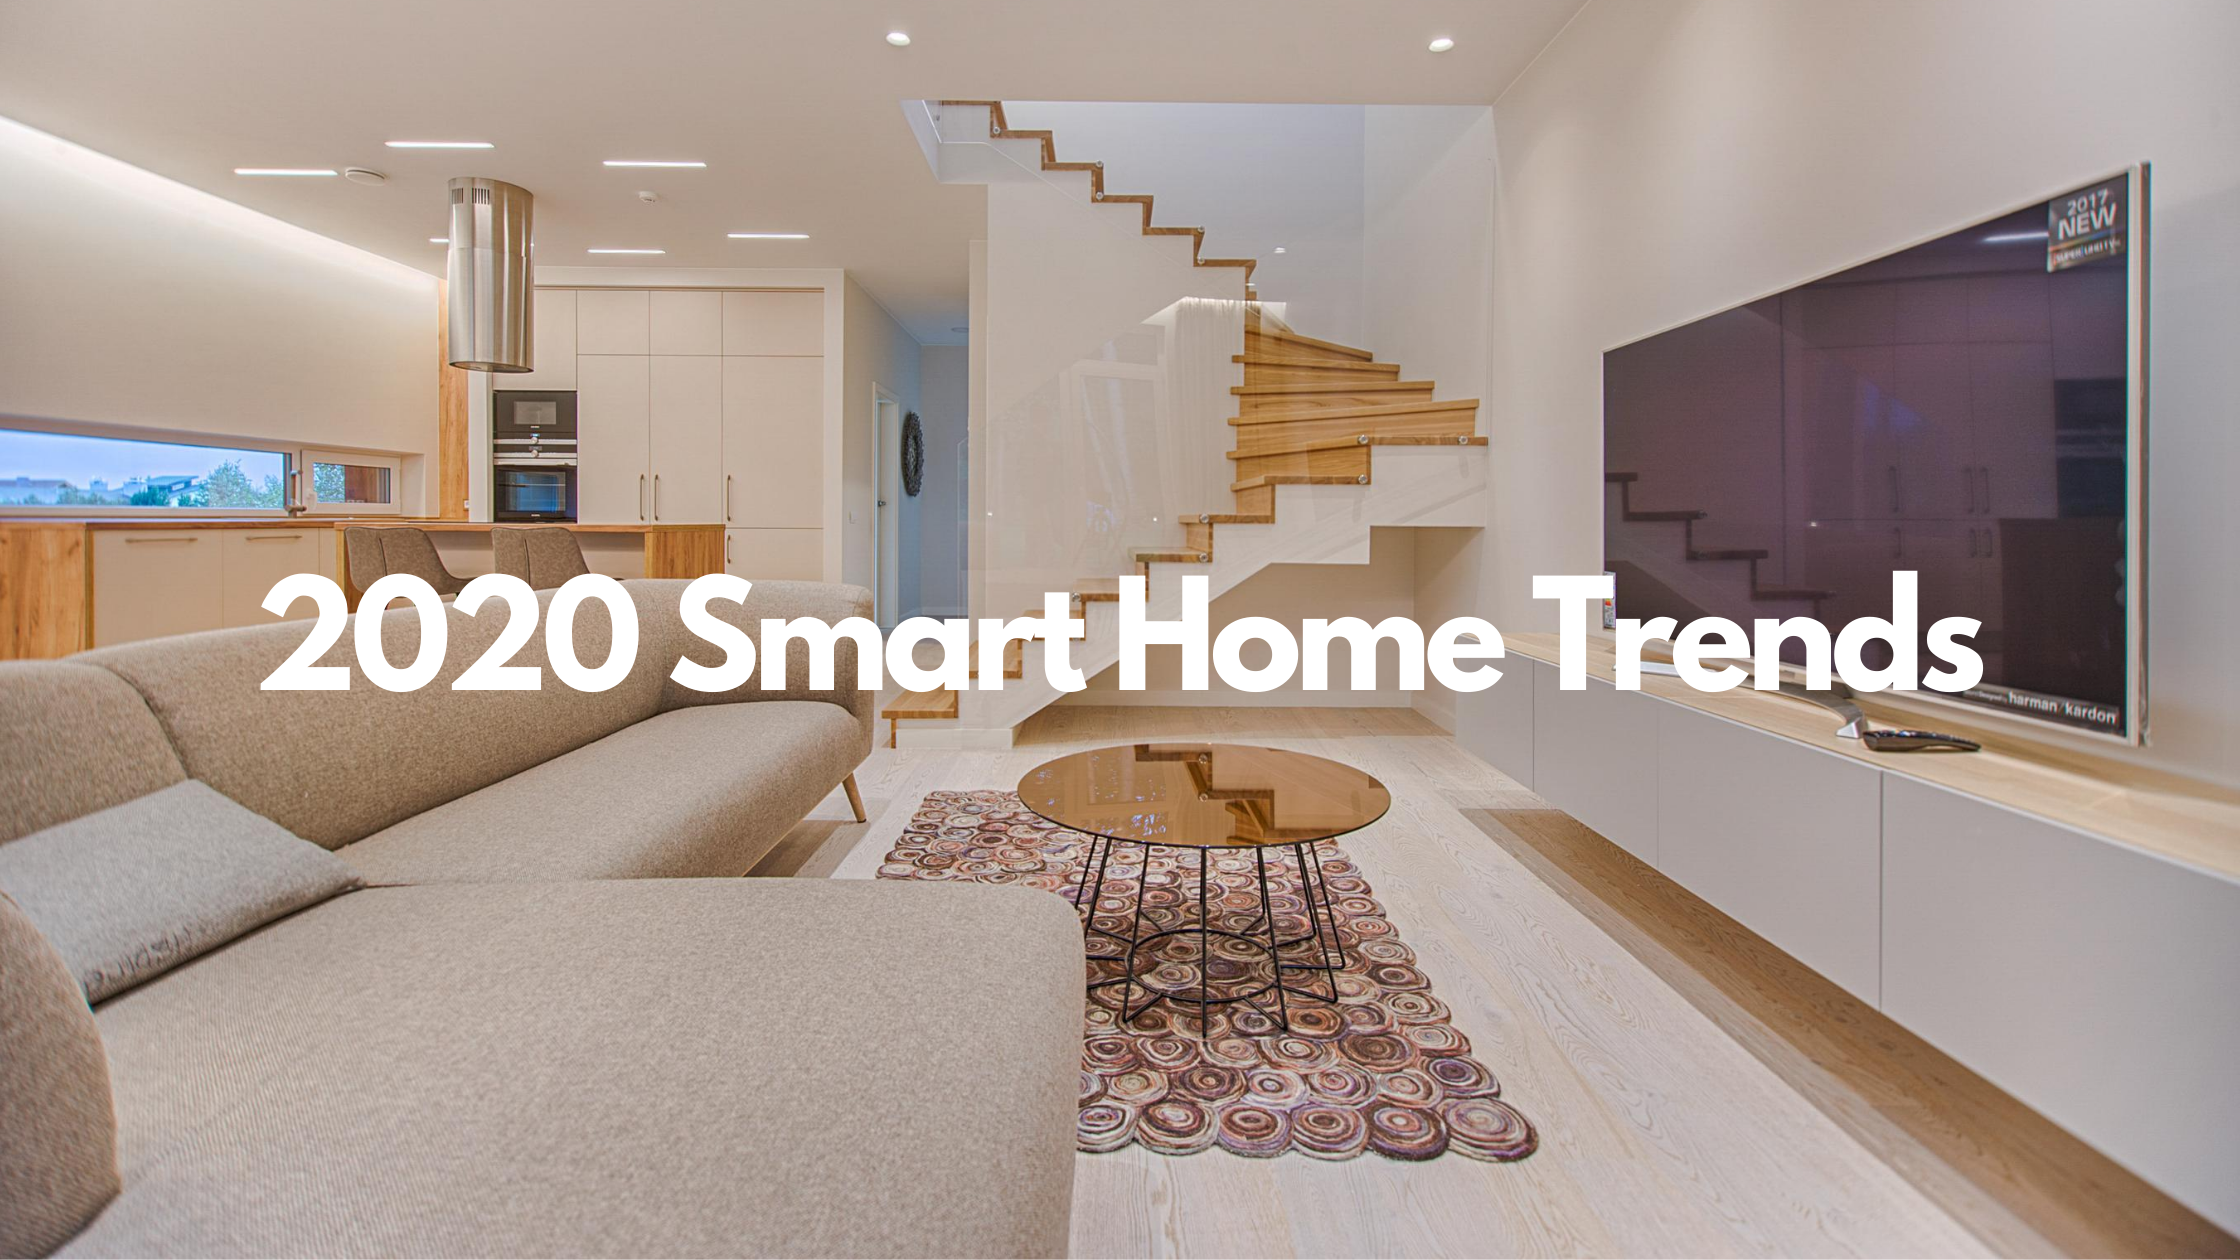 Smart Home Trends for 2020—Improve Your Smart Home With These Must-Have COVID-19 Friendly Upgrades